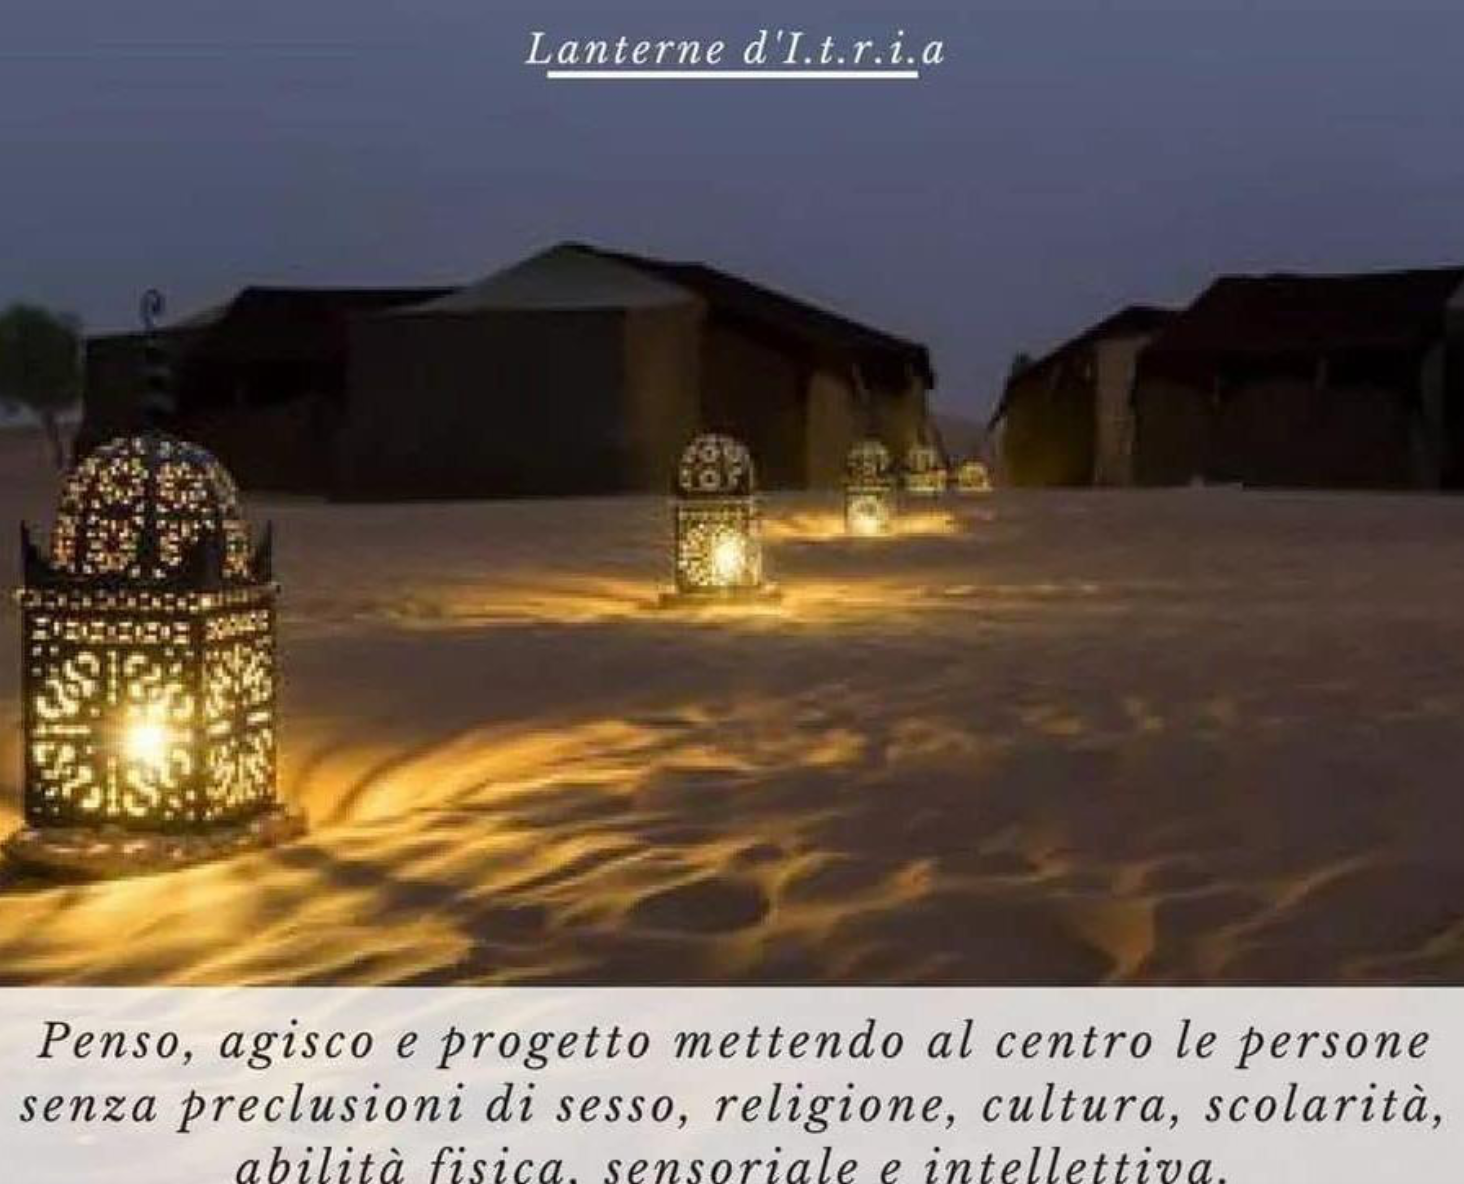 Image of lanterns with candles across an expanse of sand 